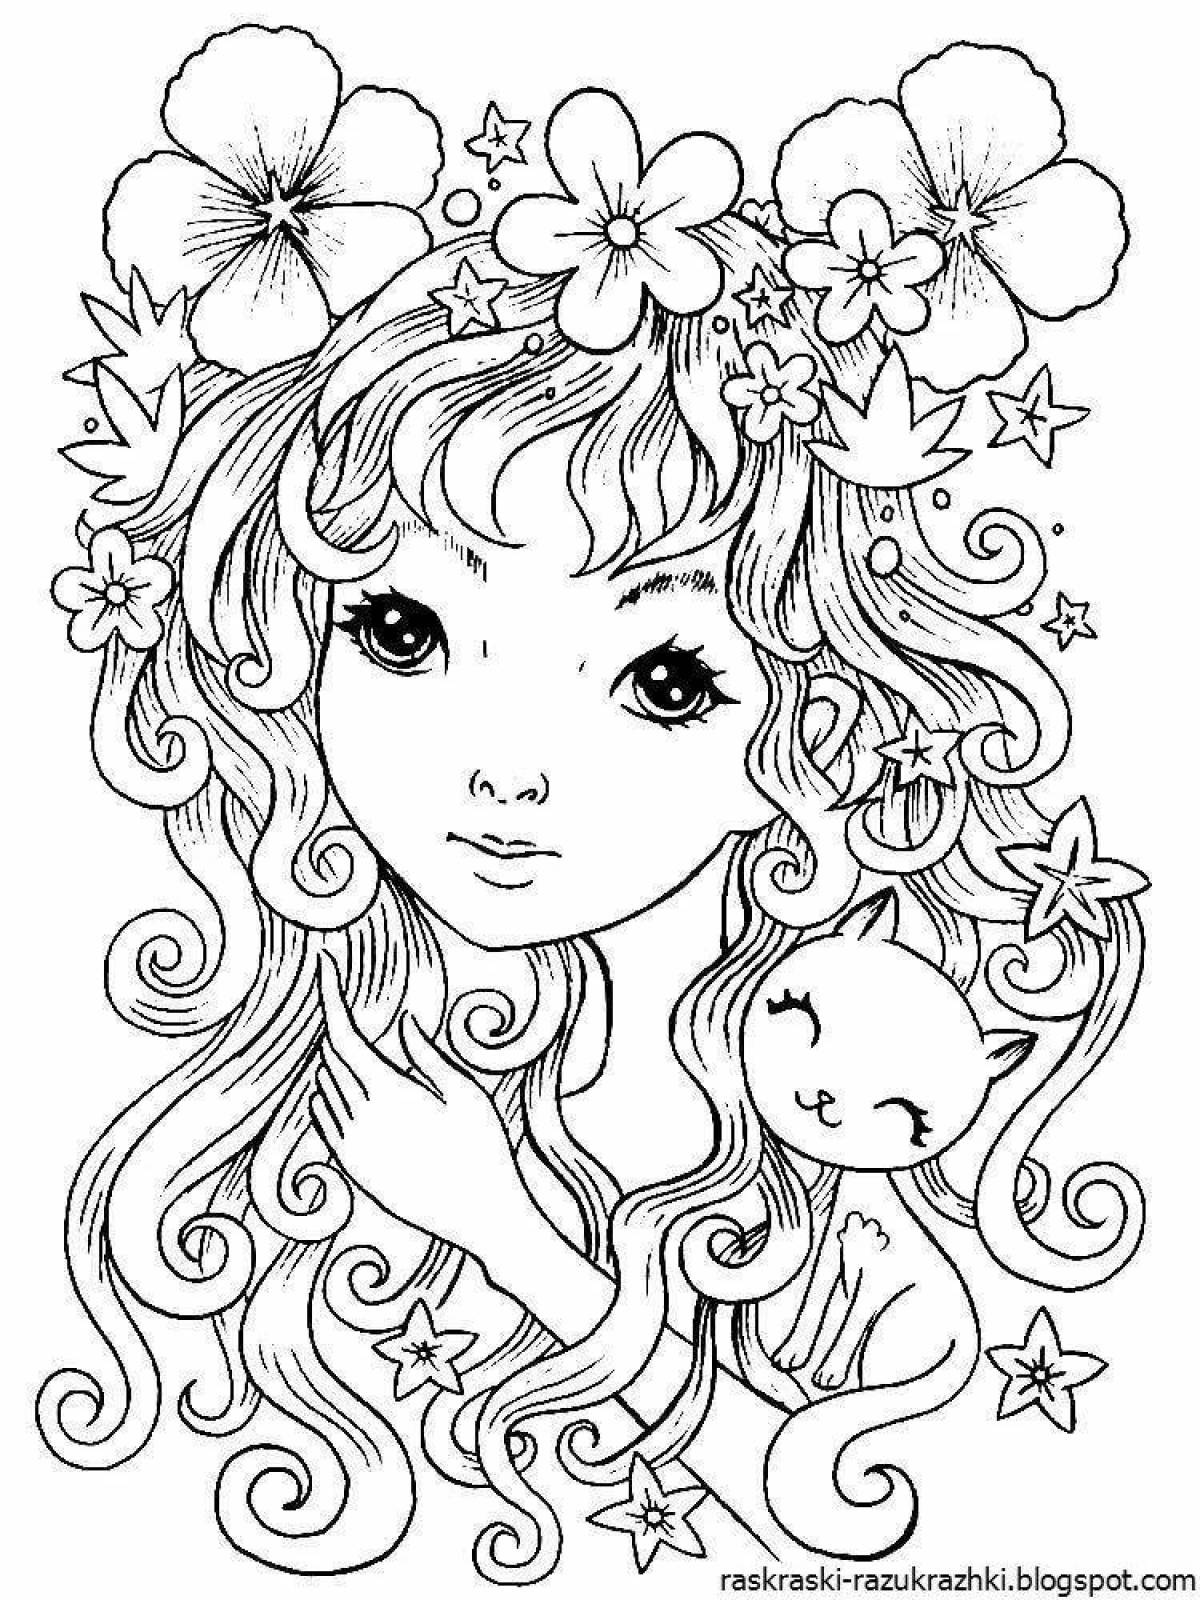 Adorable coloring book for girls 9-10 years old